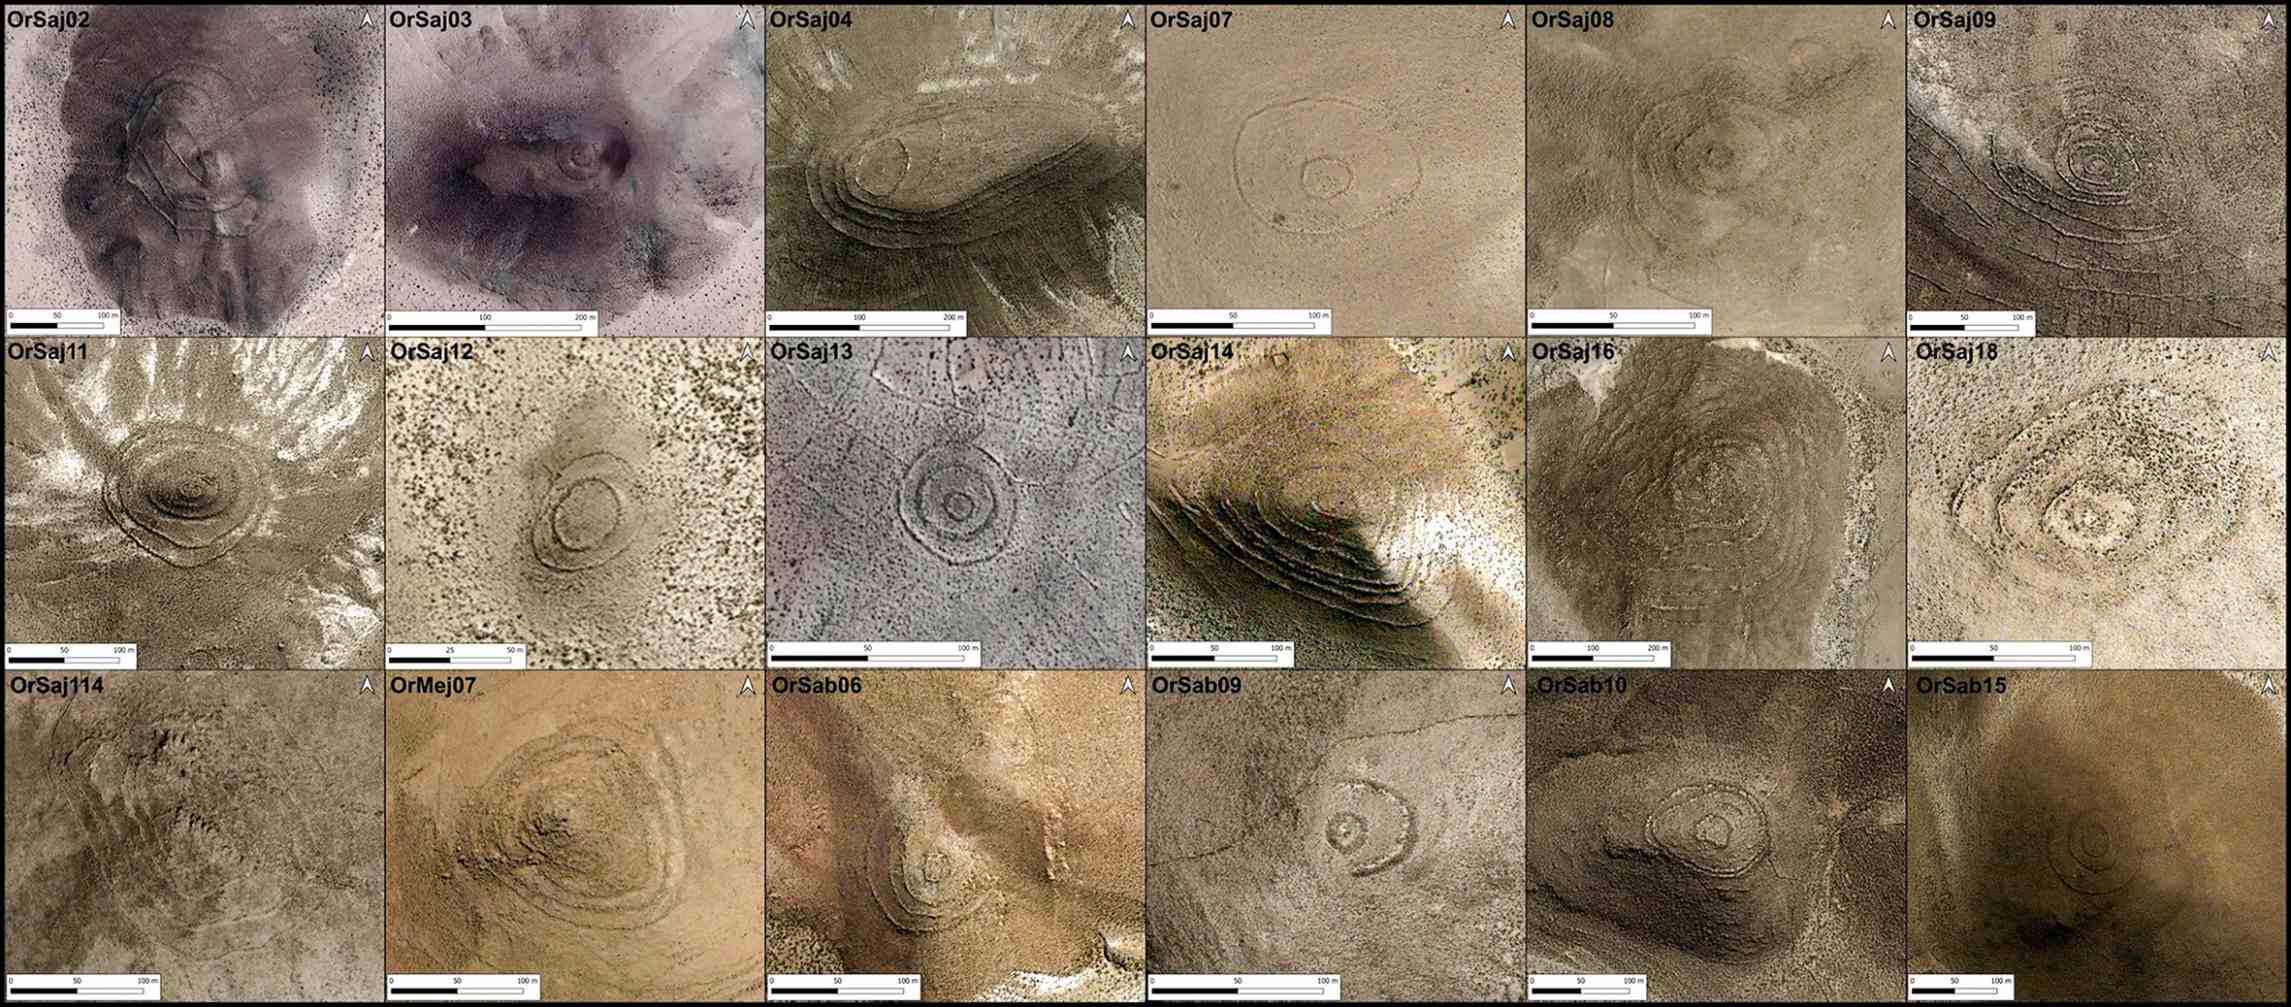 Photographs of the walled concentric sites in the Rio Lauca area of Carangas.